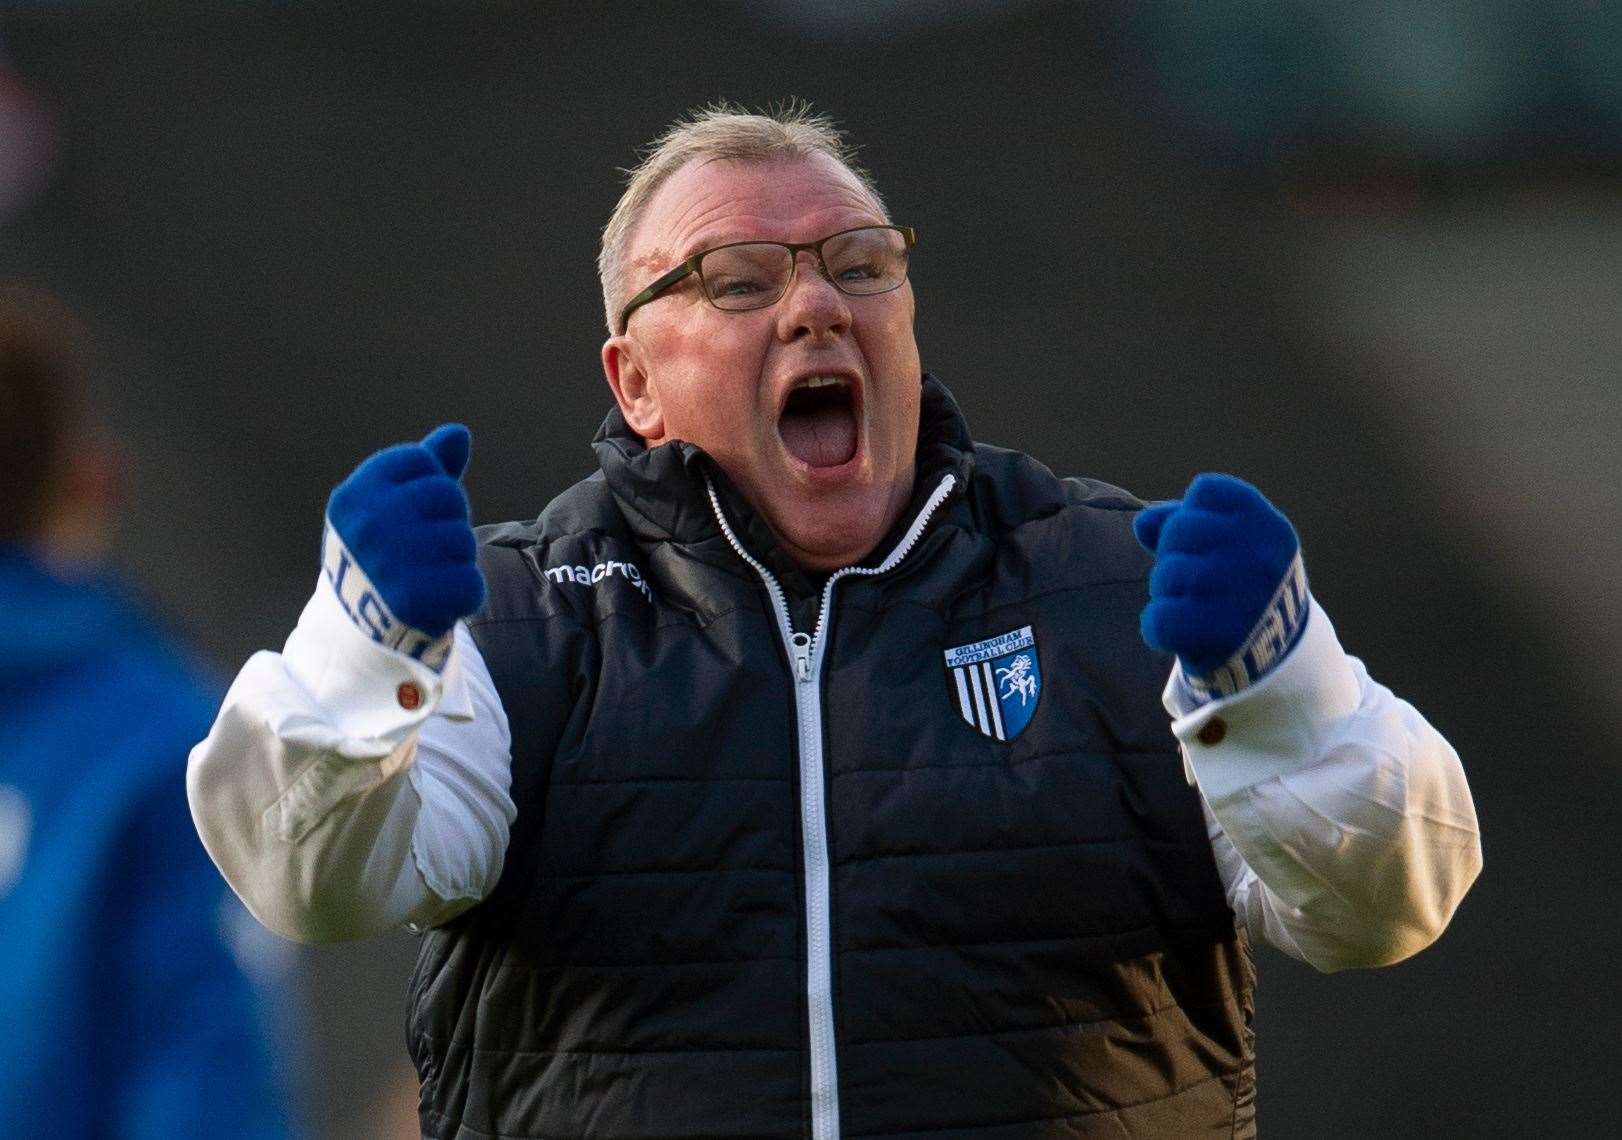 Gillingham fans will be treated to some prizes by manager Steve Evans in the next few days